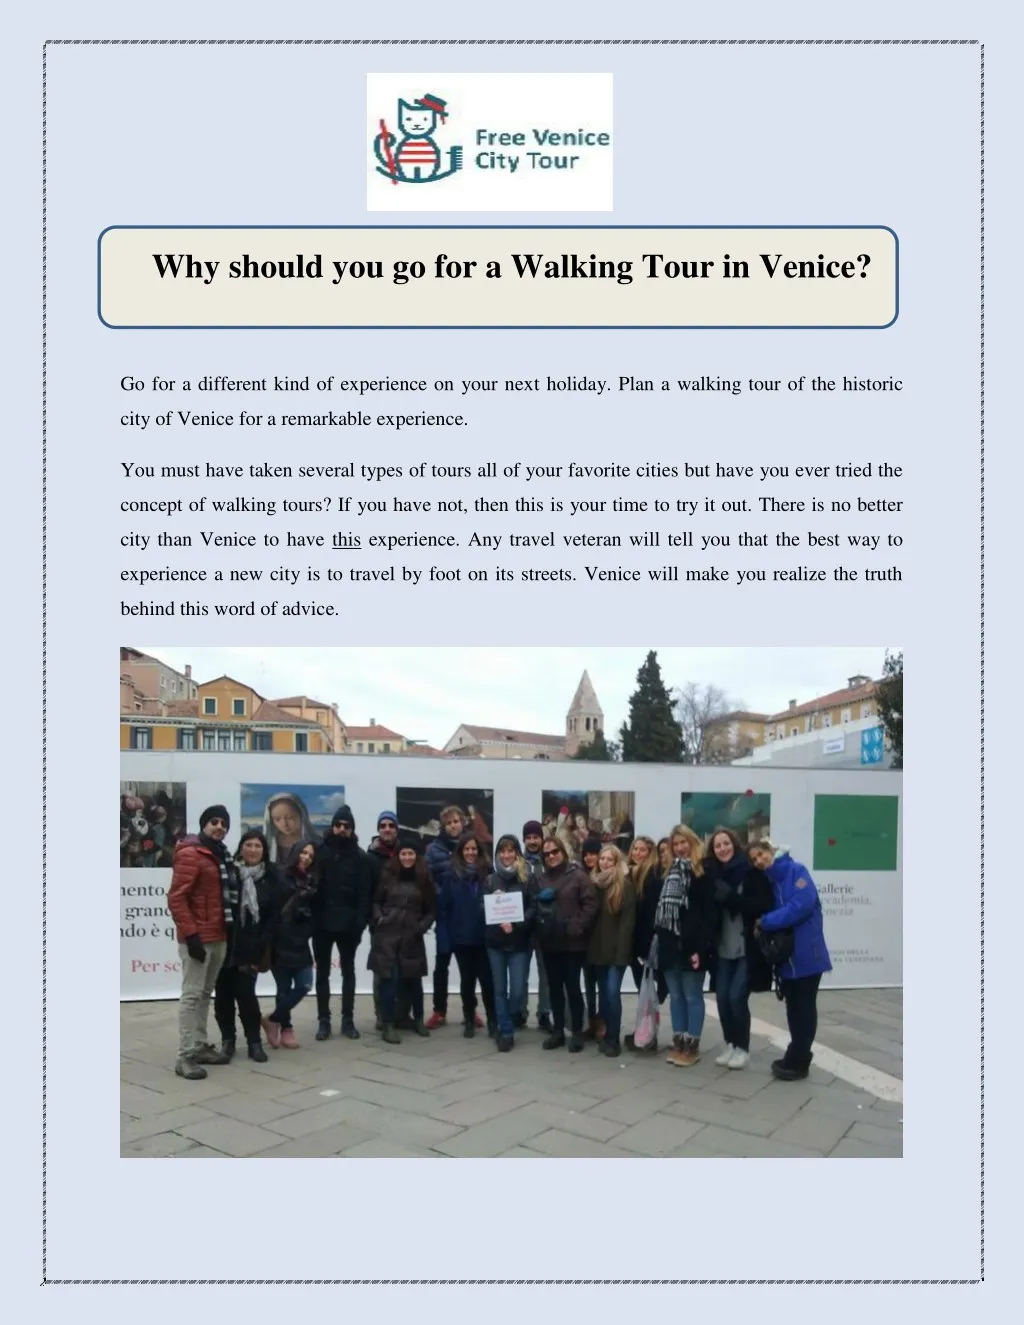 why should you go for a walking tour in venice